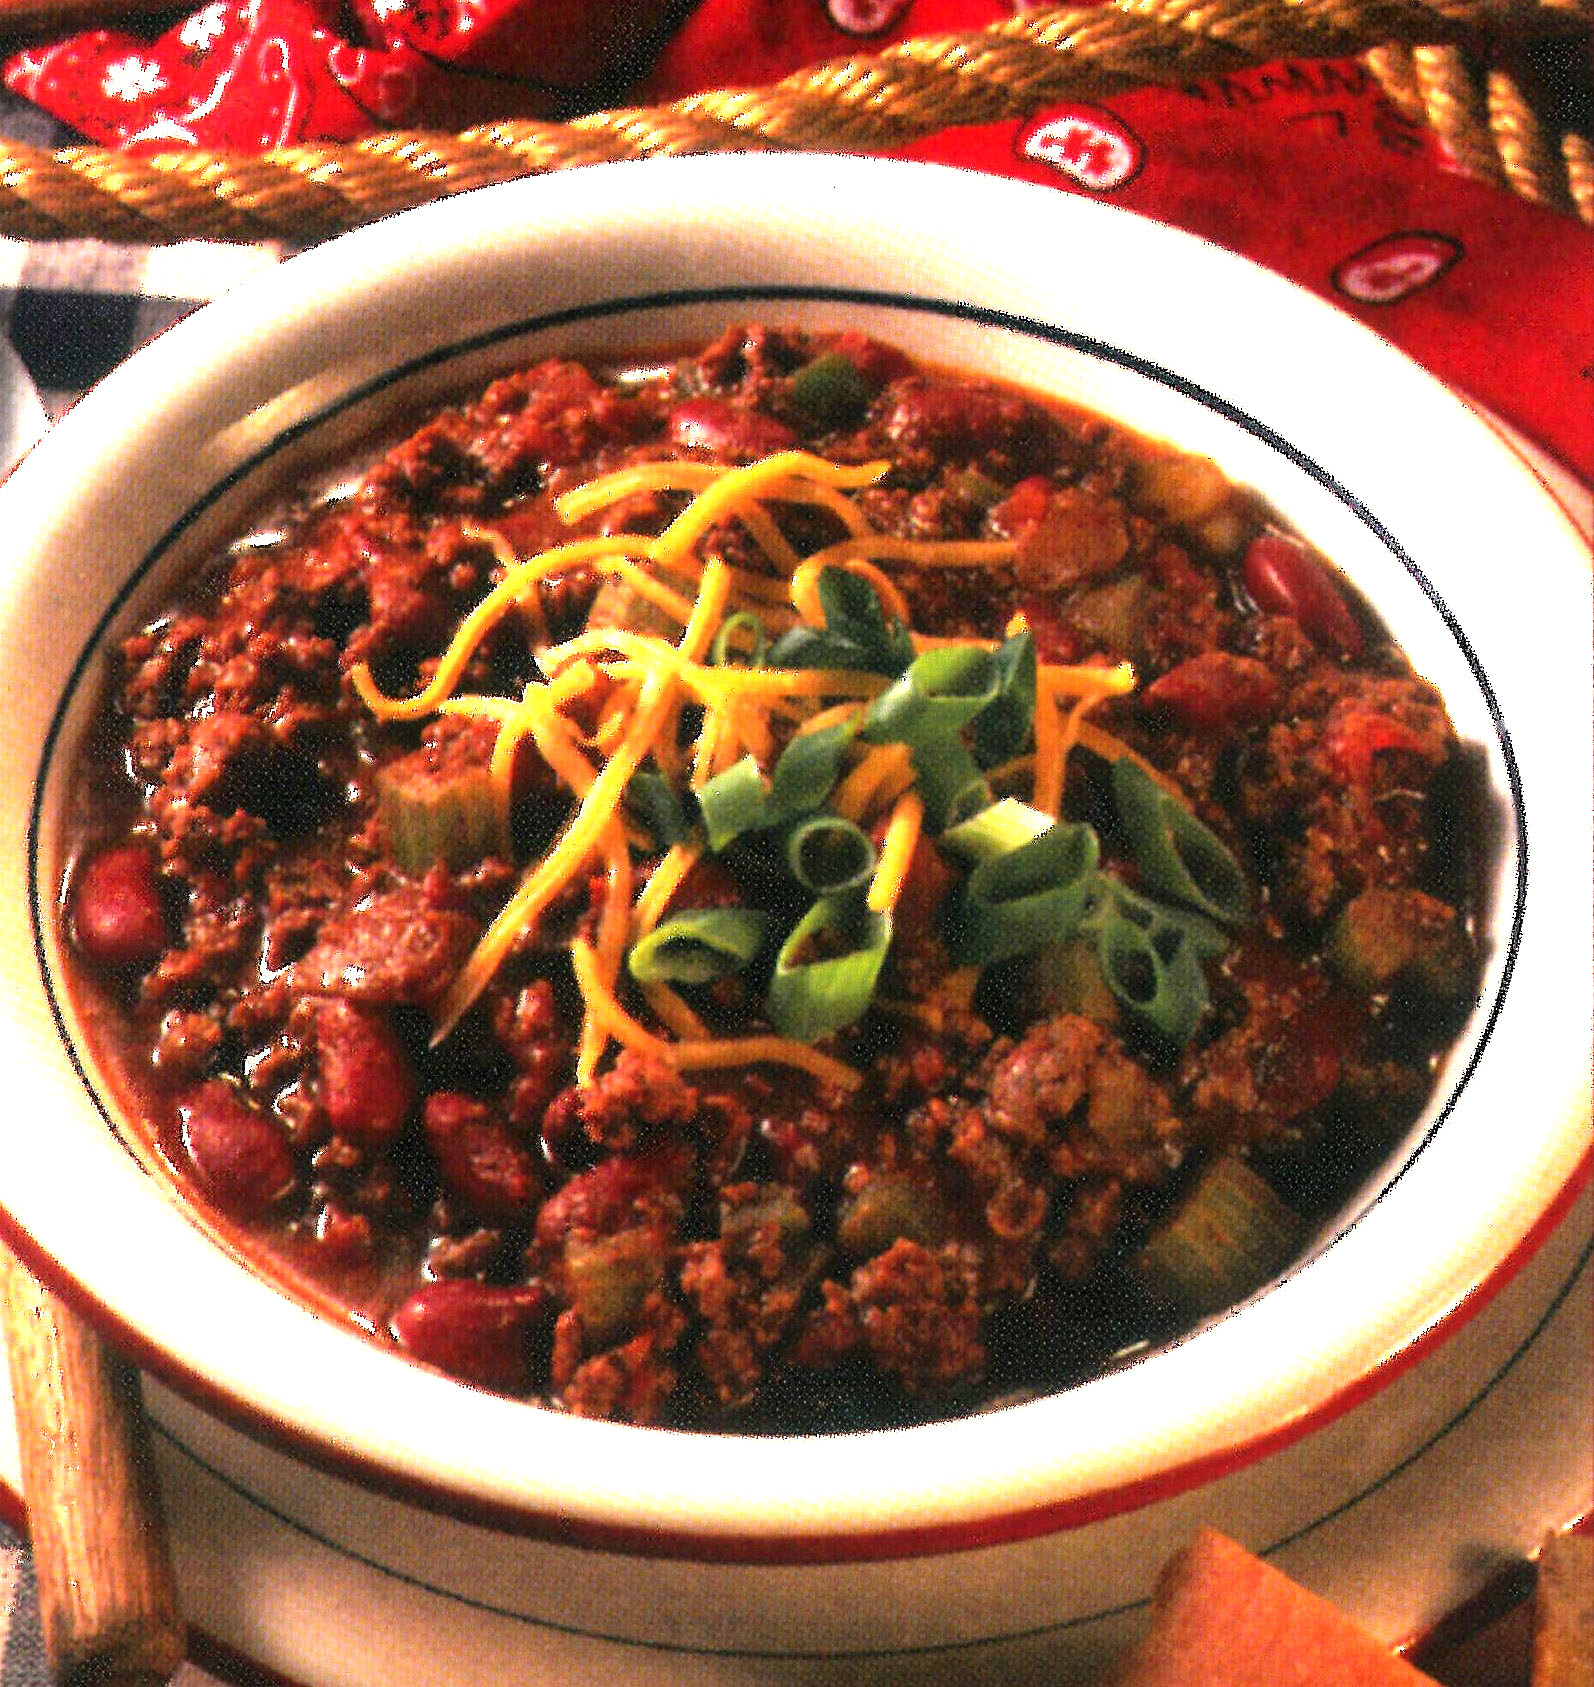 An image of the rough rider chili recipe